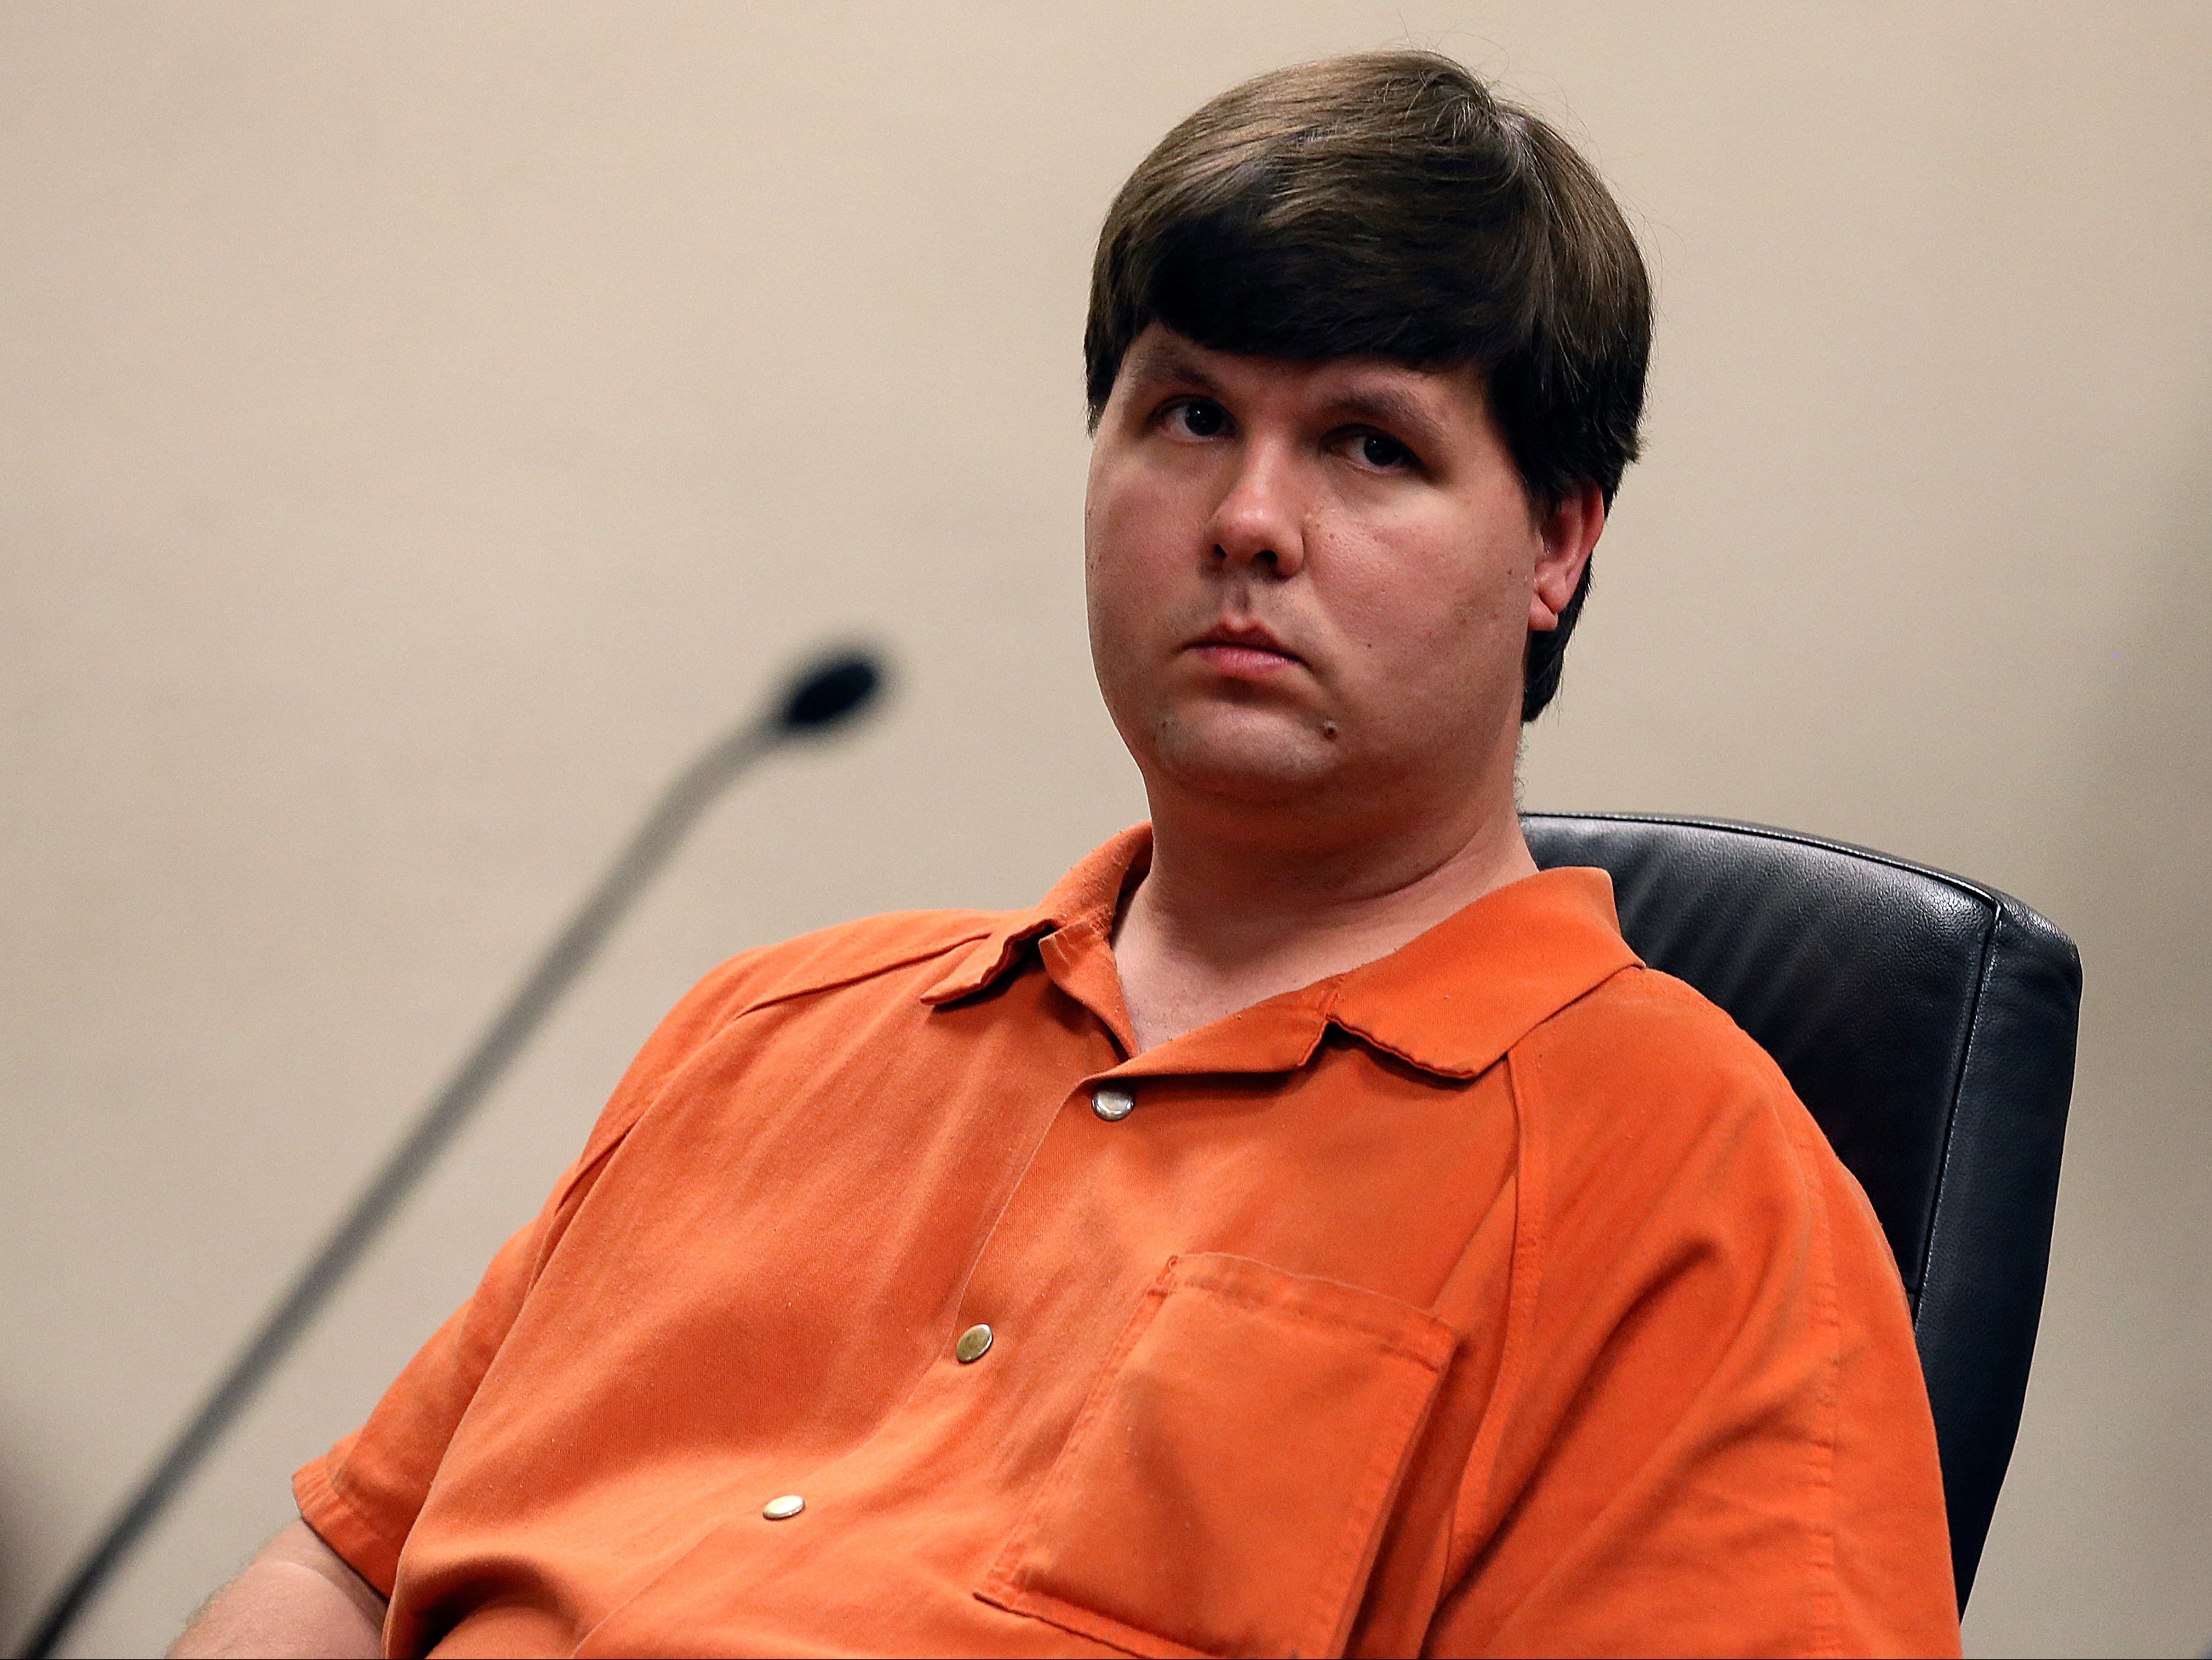 Justin Ross Harris during an appearance at the Cobb County Magistrate Court in Marietta, Georgia, in 2014